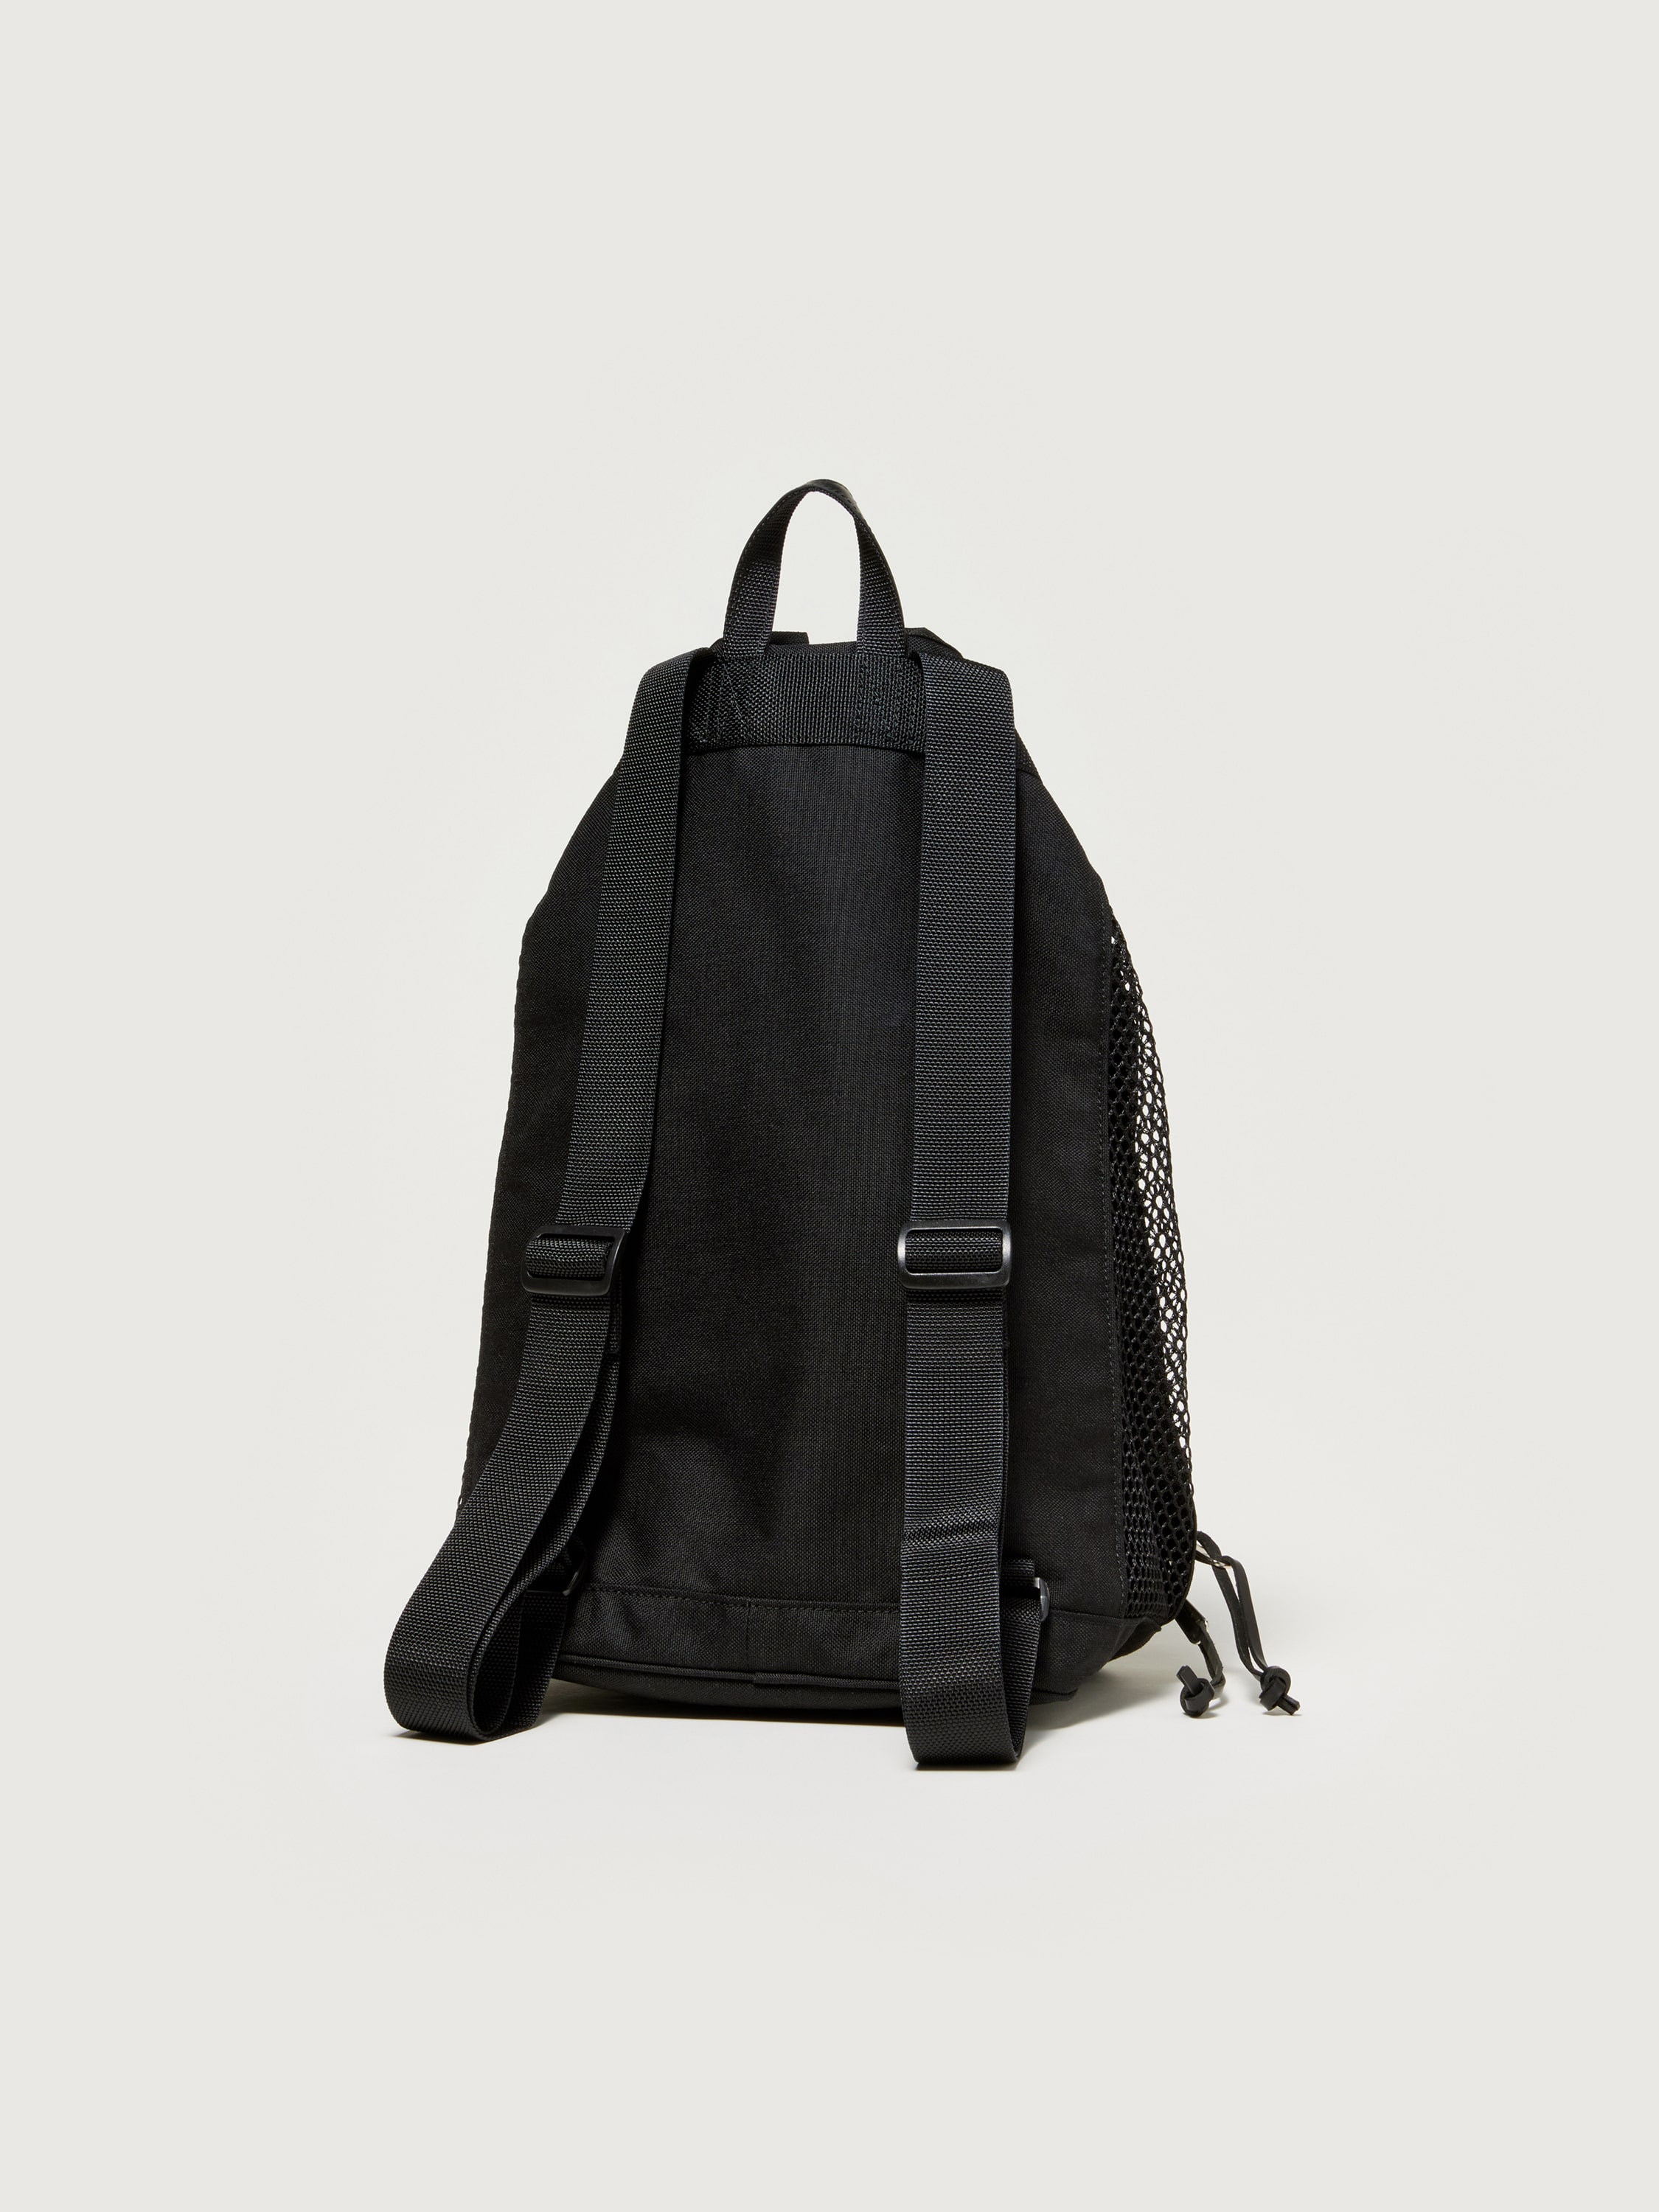 MESH SMALL BACKPACK MADE BY AETA 詳細画像 BLACK 2